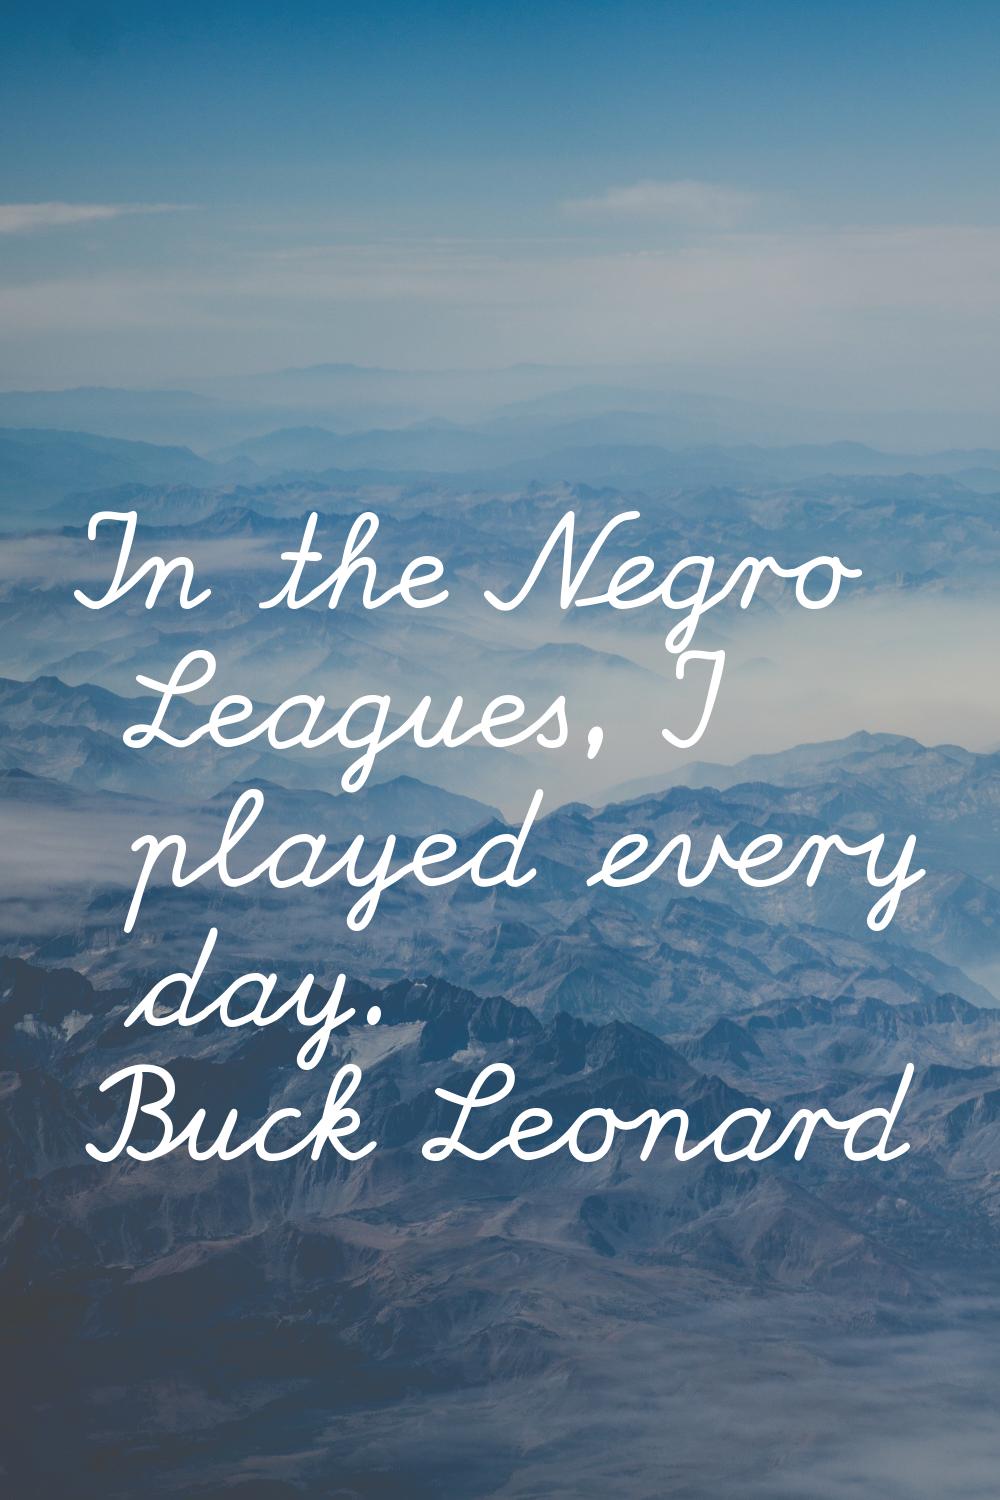 In the Negro Leagues, I played every day.